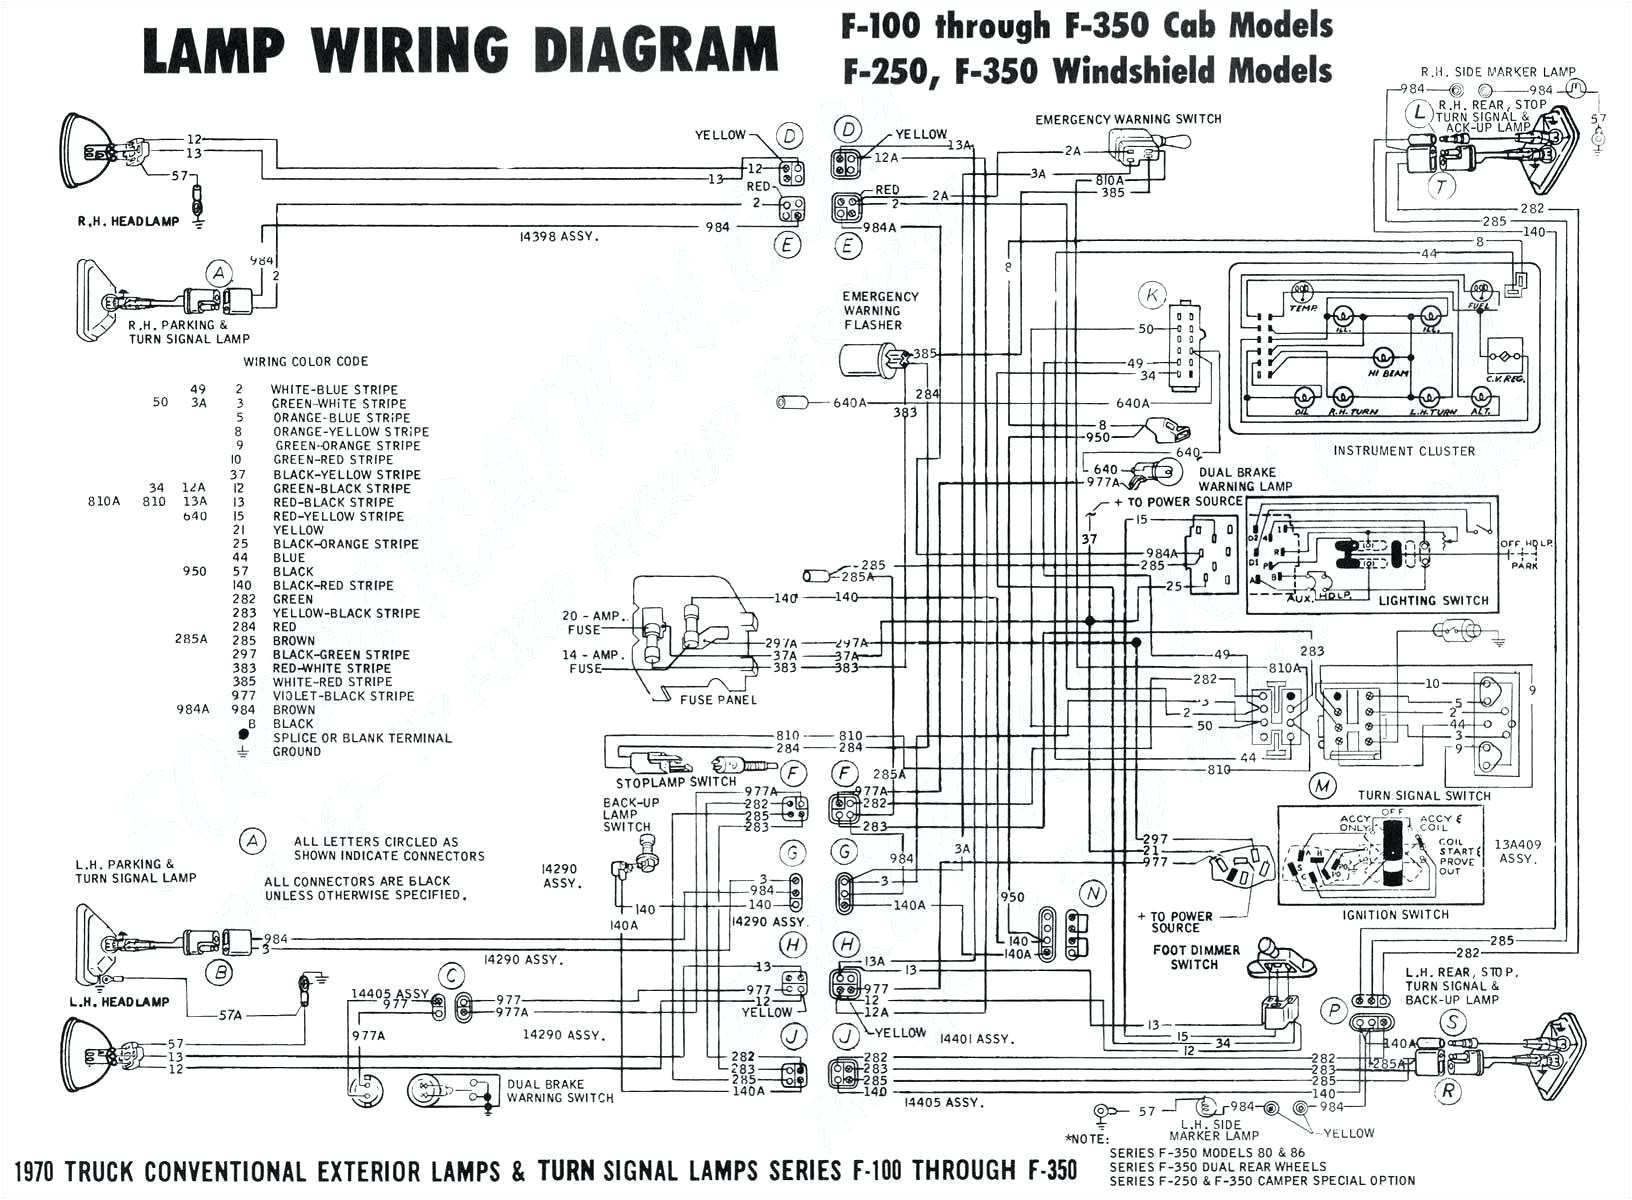 1989 vw cabriolet cruise control stereo wiring diagram service 1989 vw cabriolet wiring diagram radio